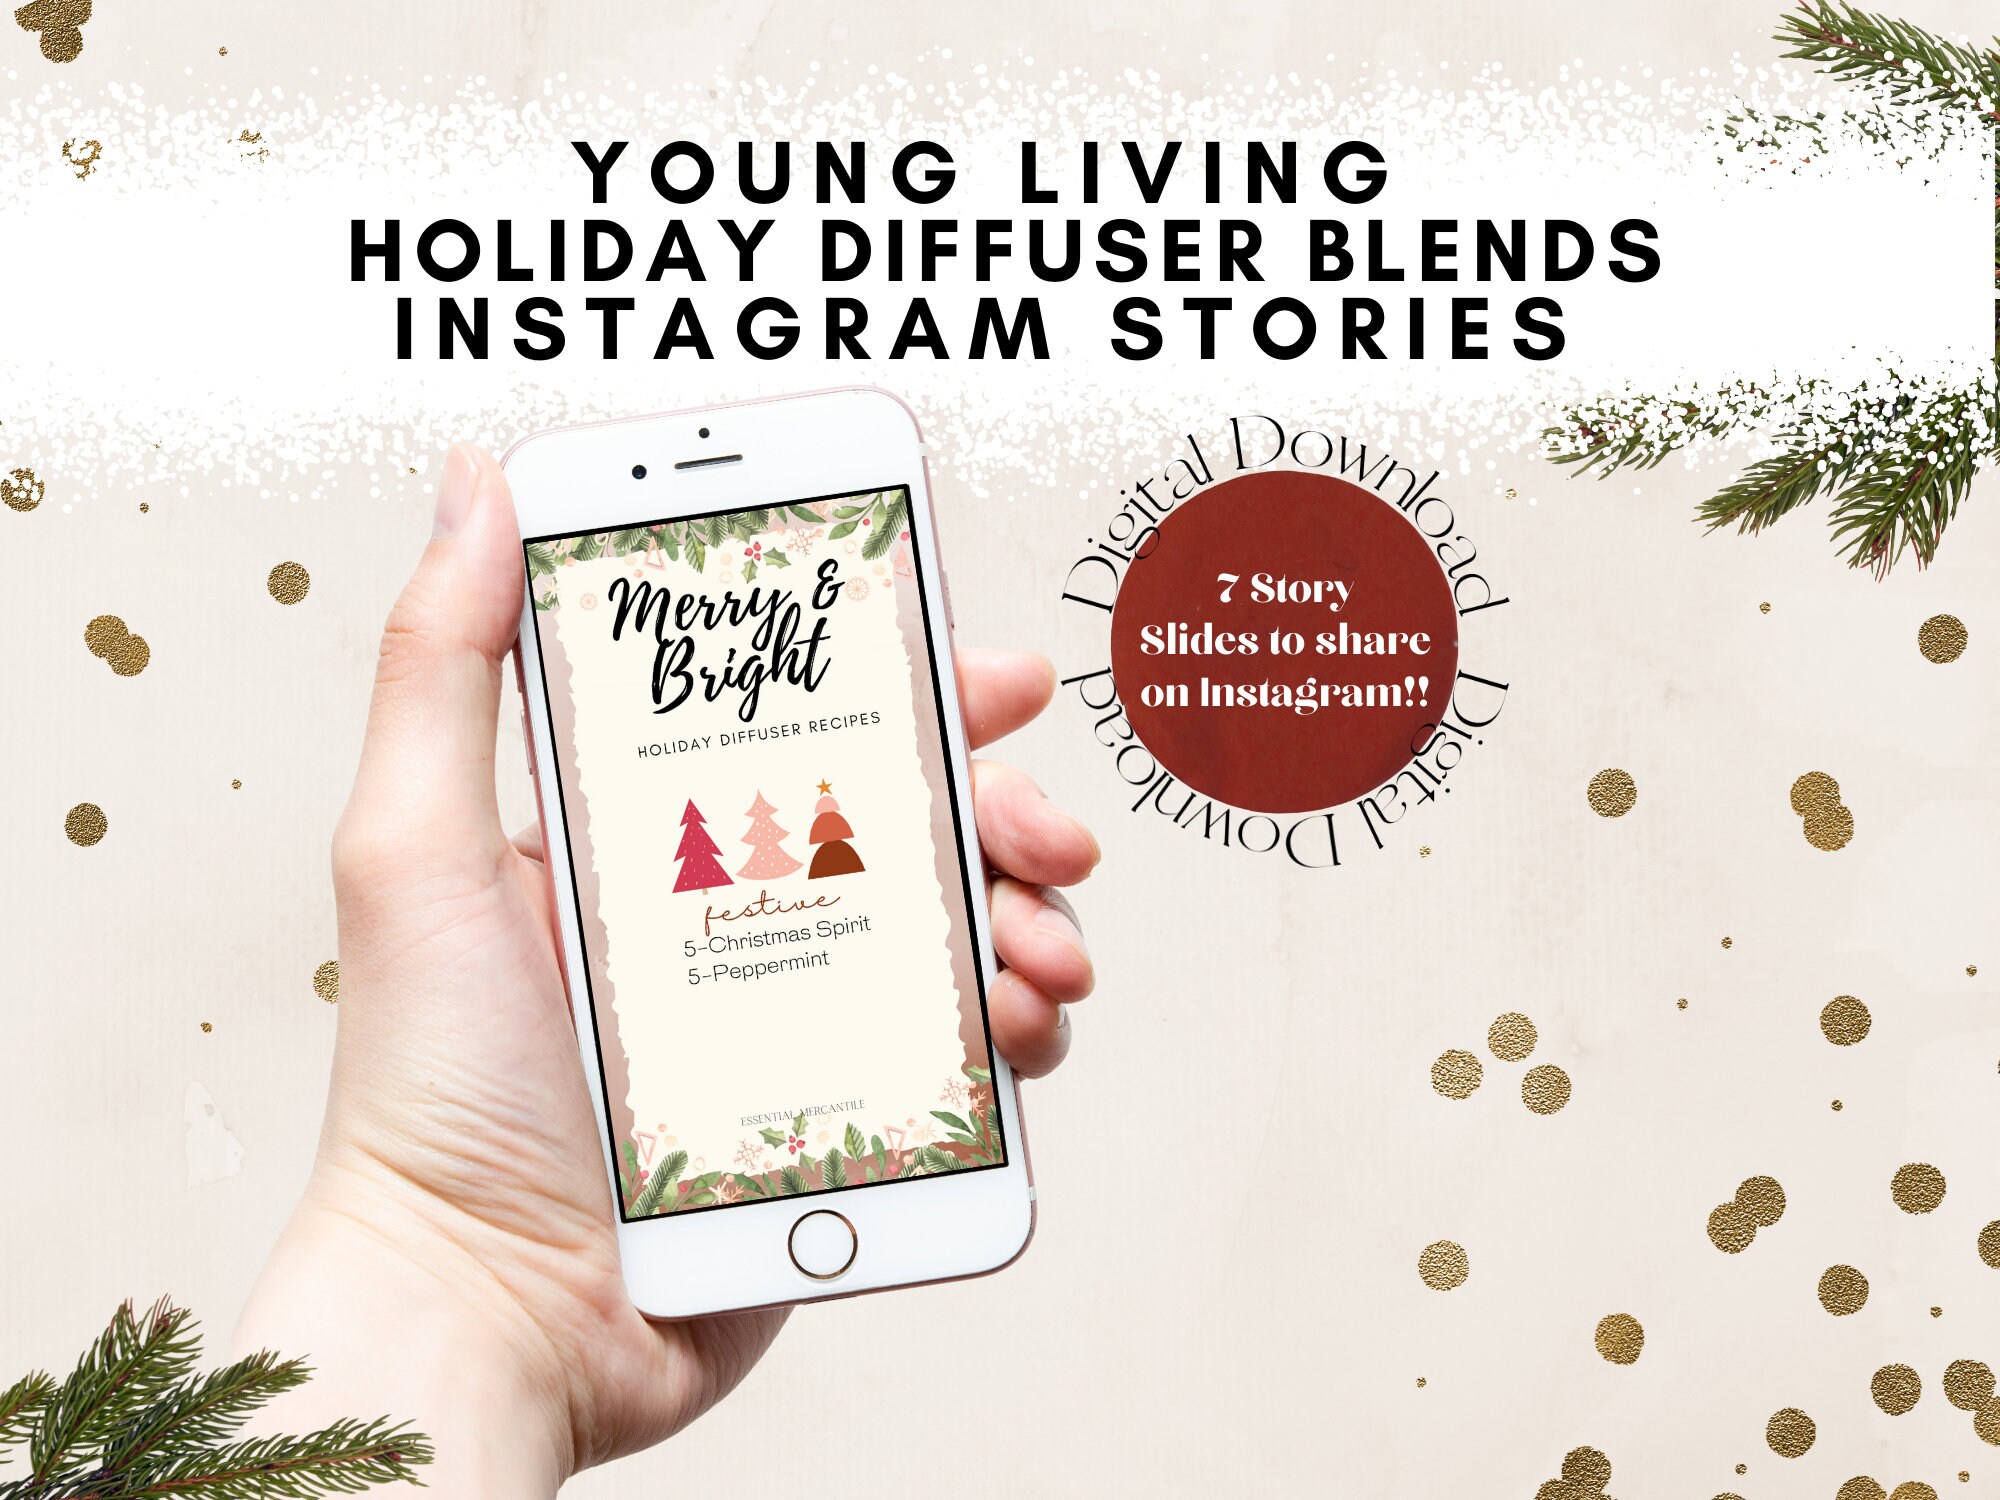 Masculine Diffuser Blends Instagram Stories for Him Young Living